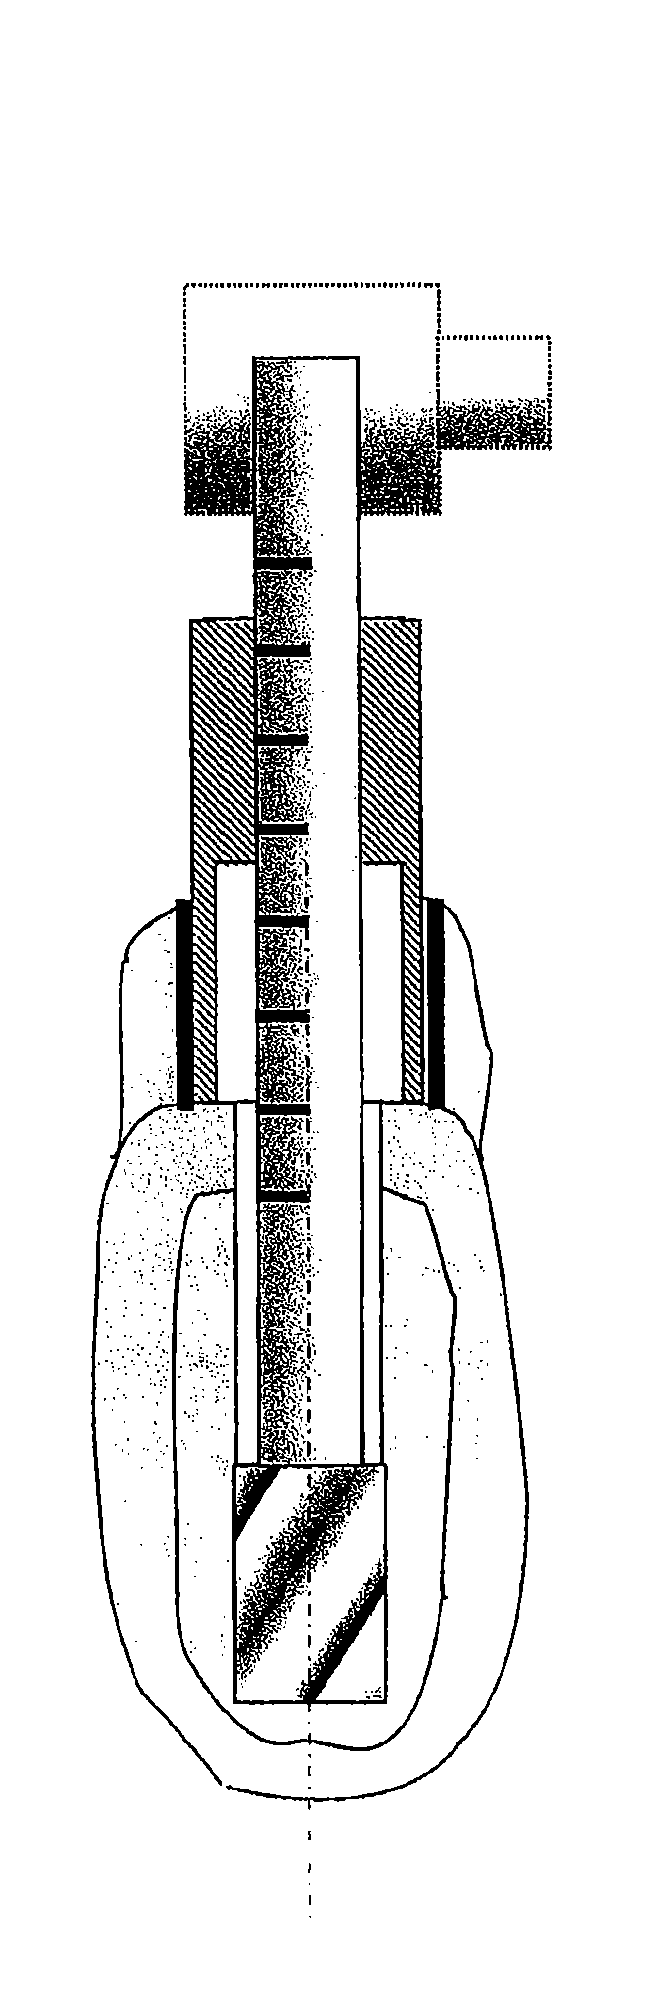 Bone modelling and guide device for preparing bone sites for implant surgery